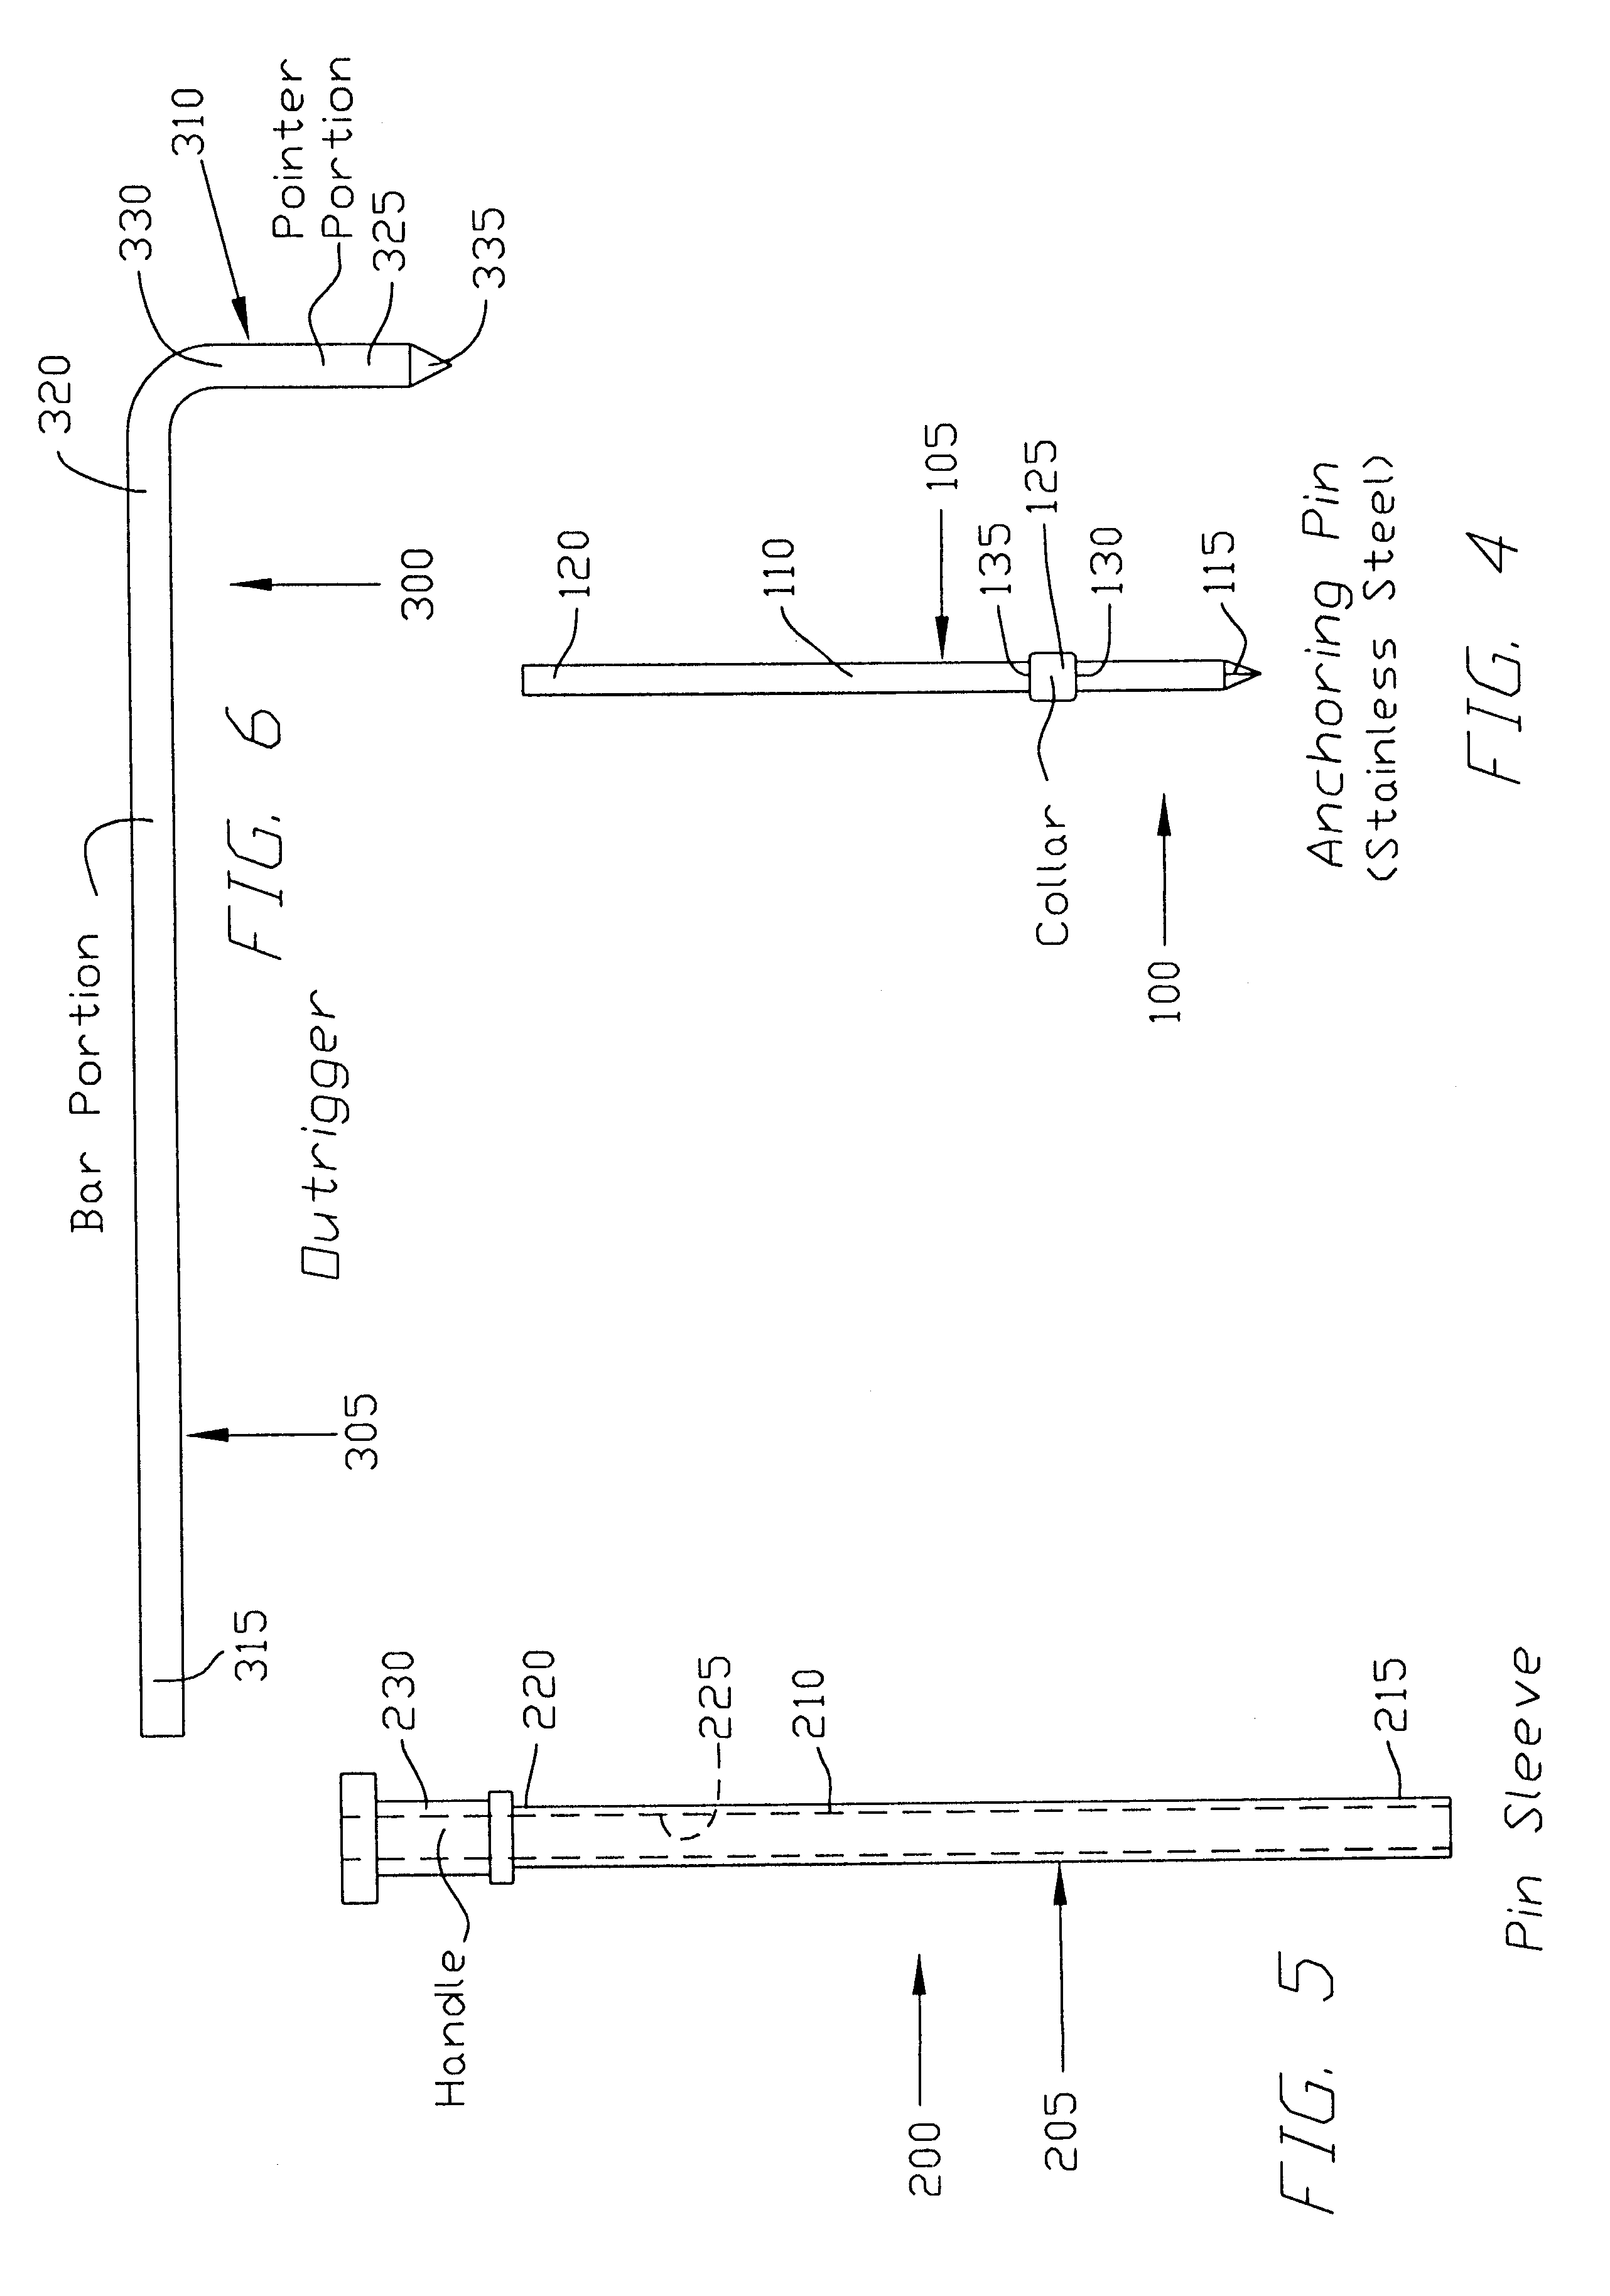 Apparatus and method for determining the relative position of bones during surgery